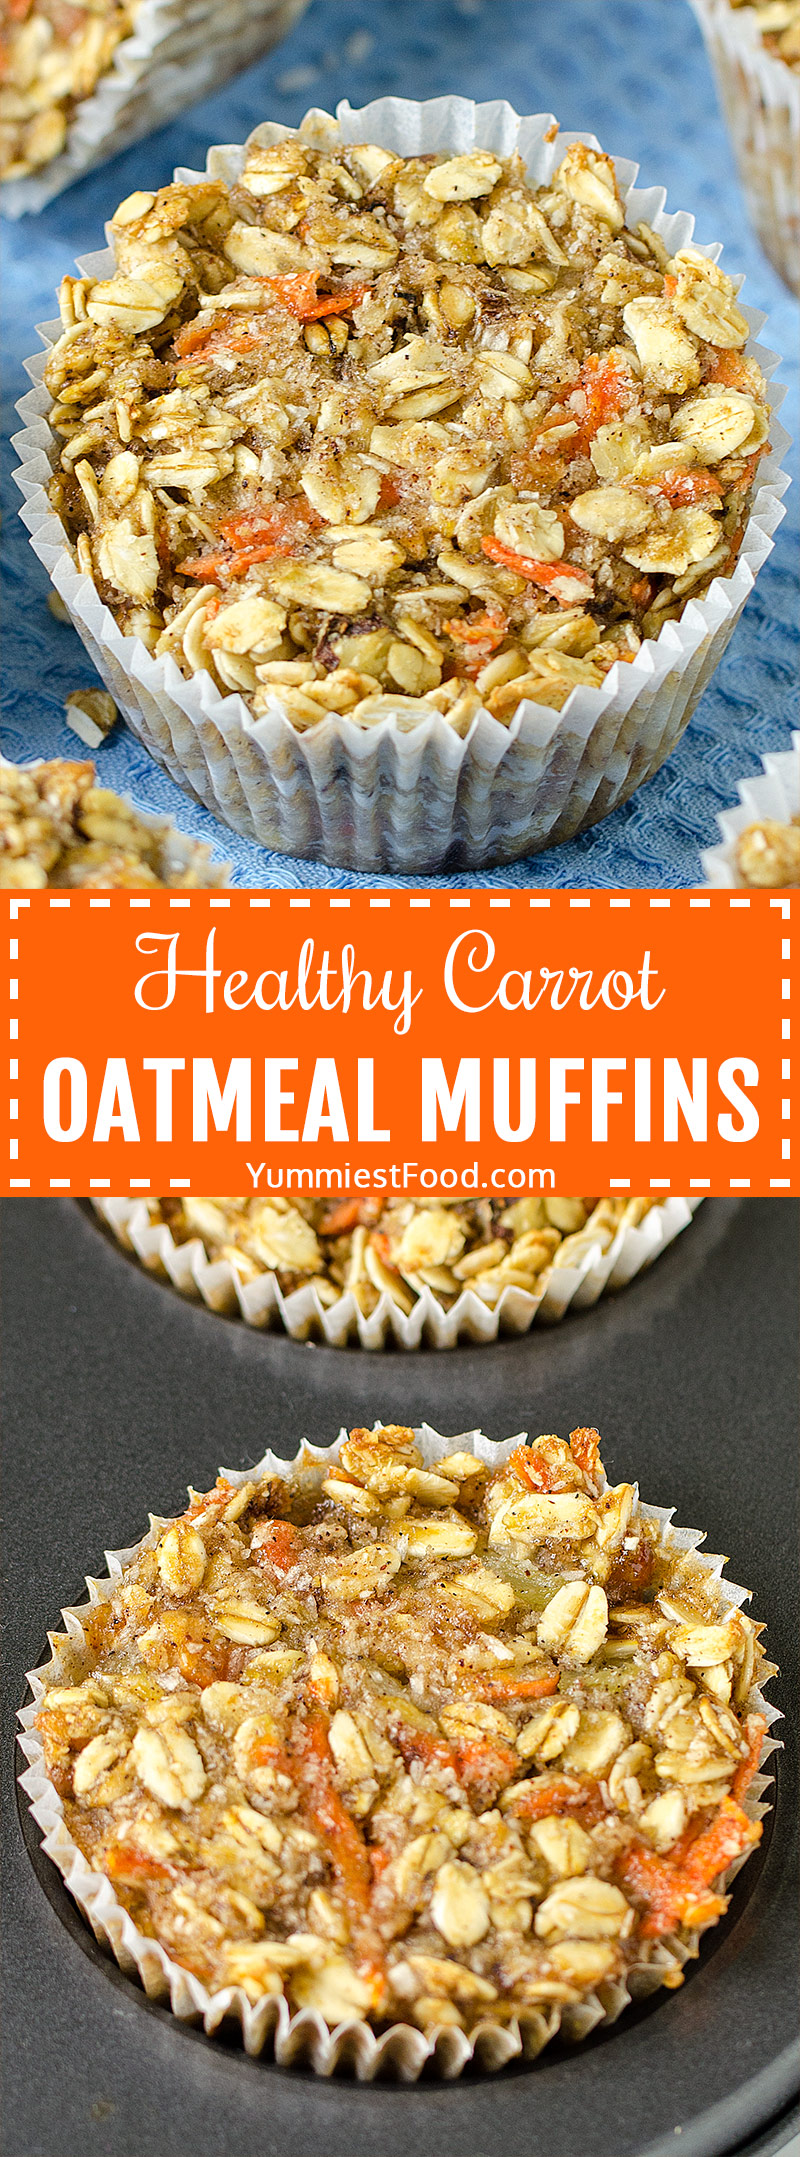 HEALTHY CARROT OATMEAL MUFFINS - healthy way to start your day